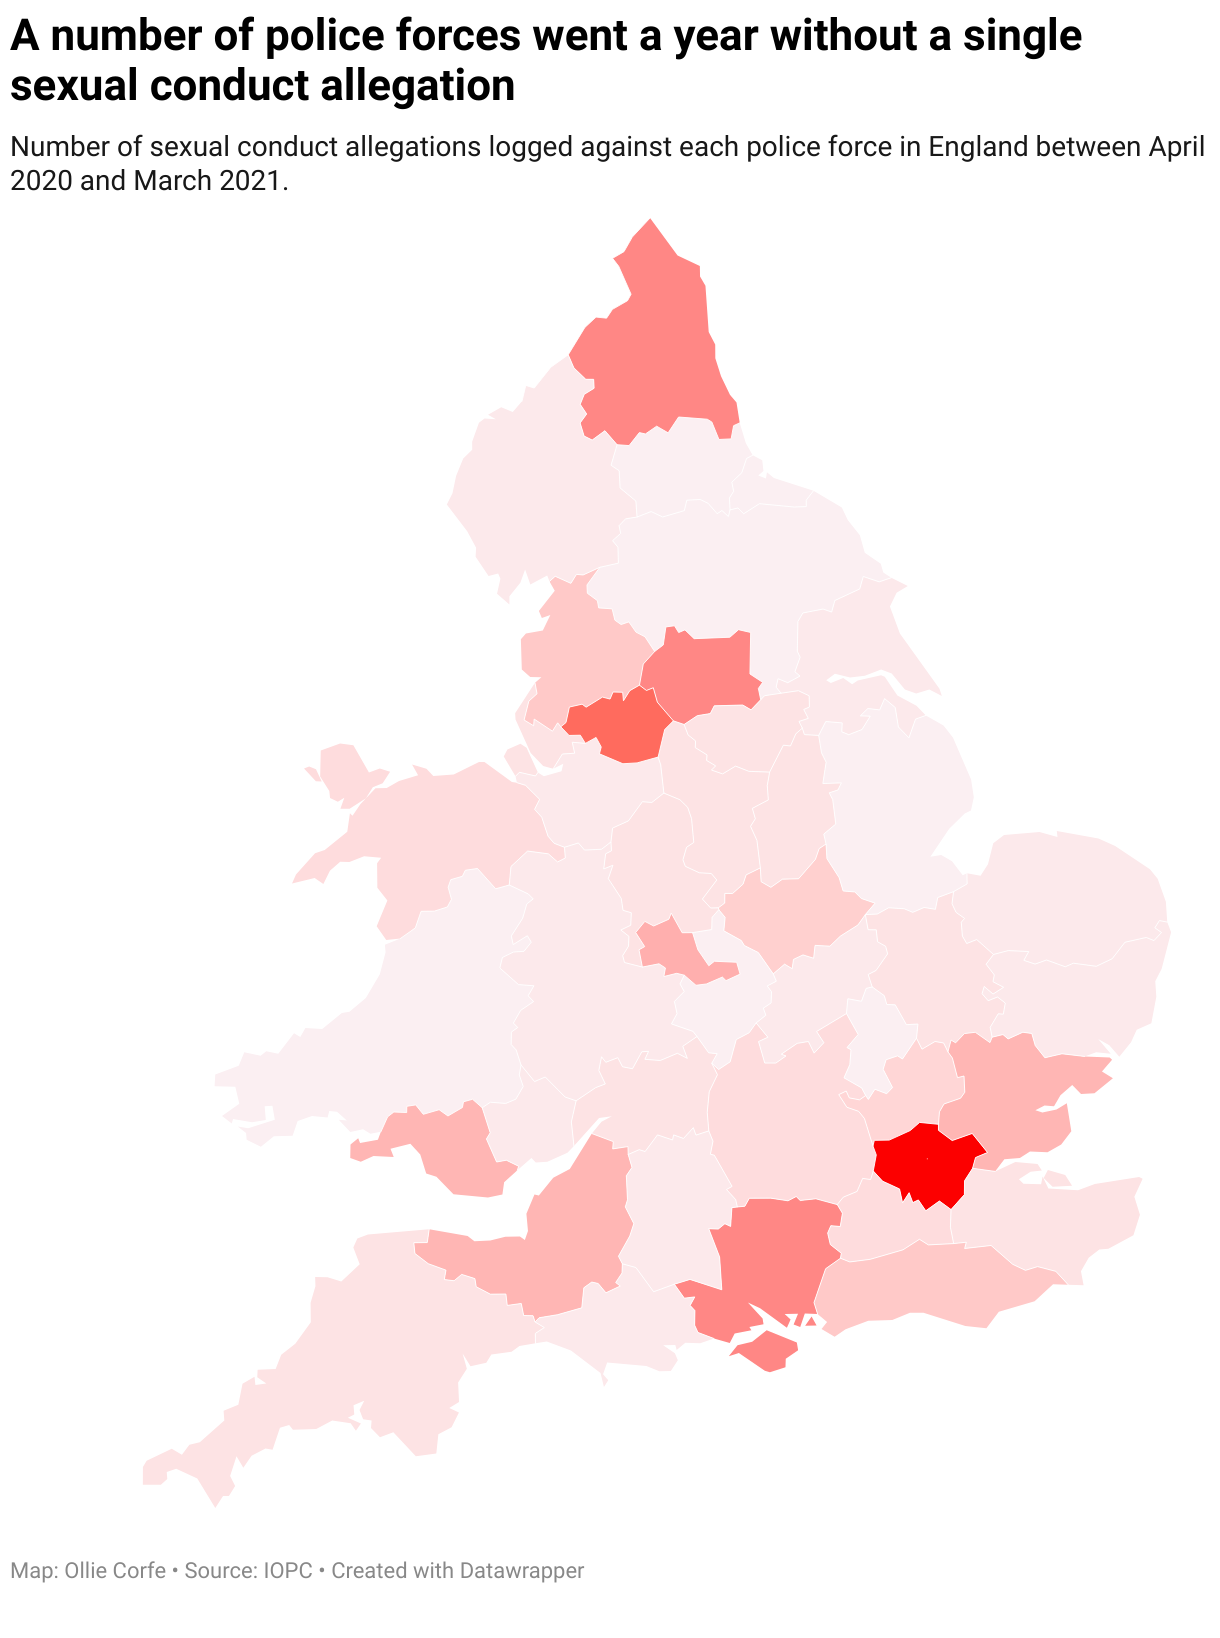 Map of England's police forces coloured by sexual misconduct cases.